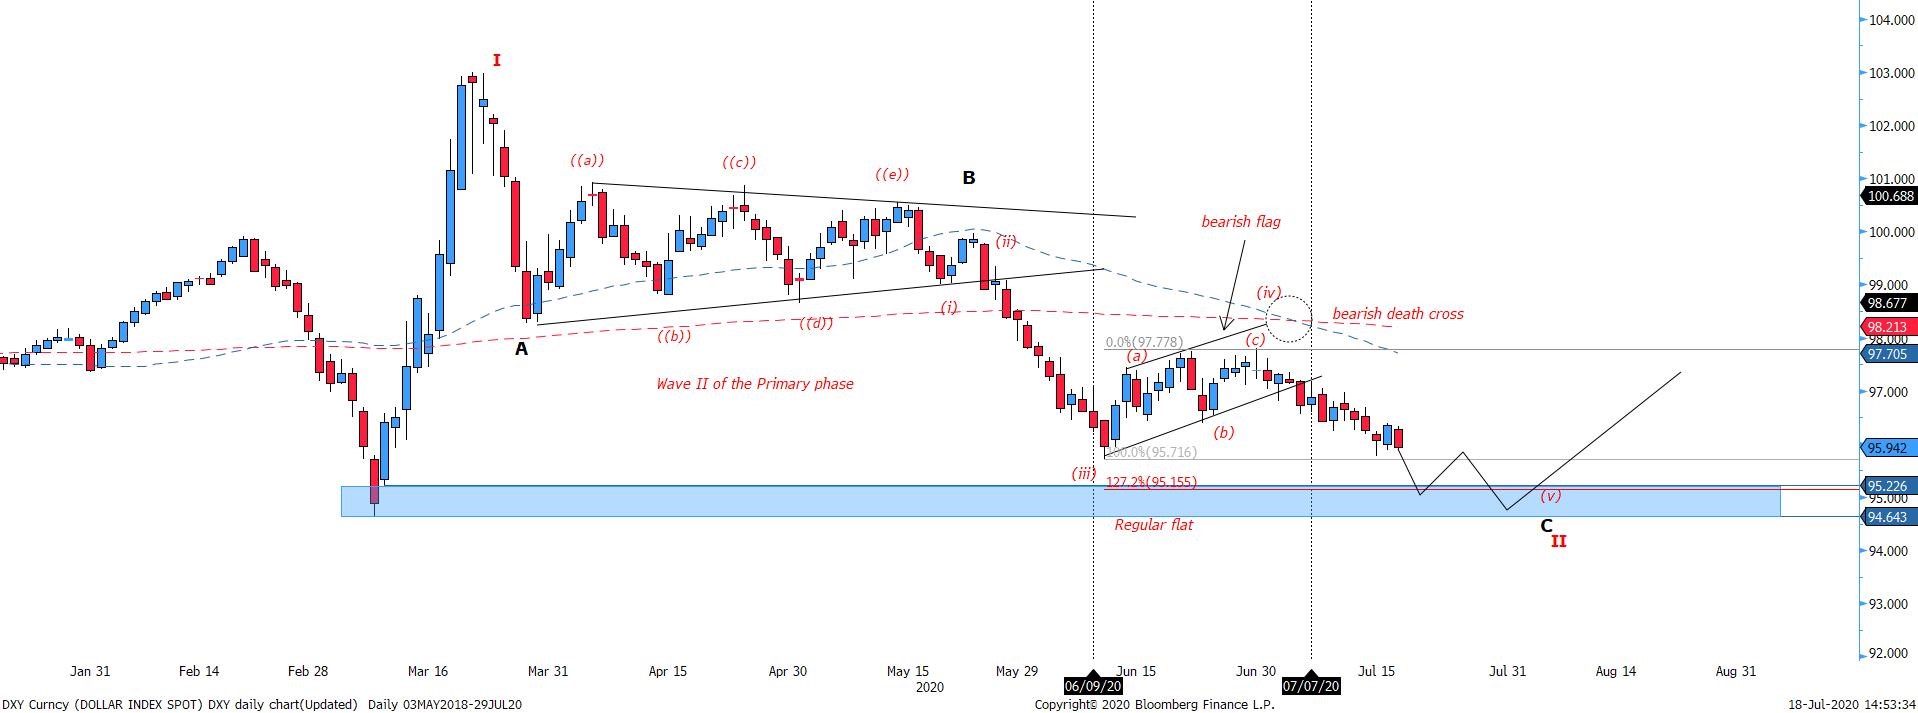 Figure 1 Dollar Index – Elliott sub-wave correction in place, with price falling towards support zone